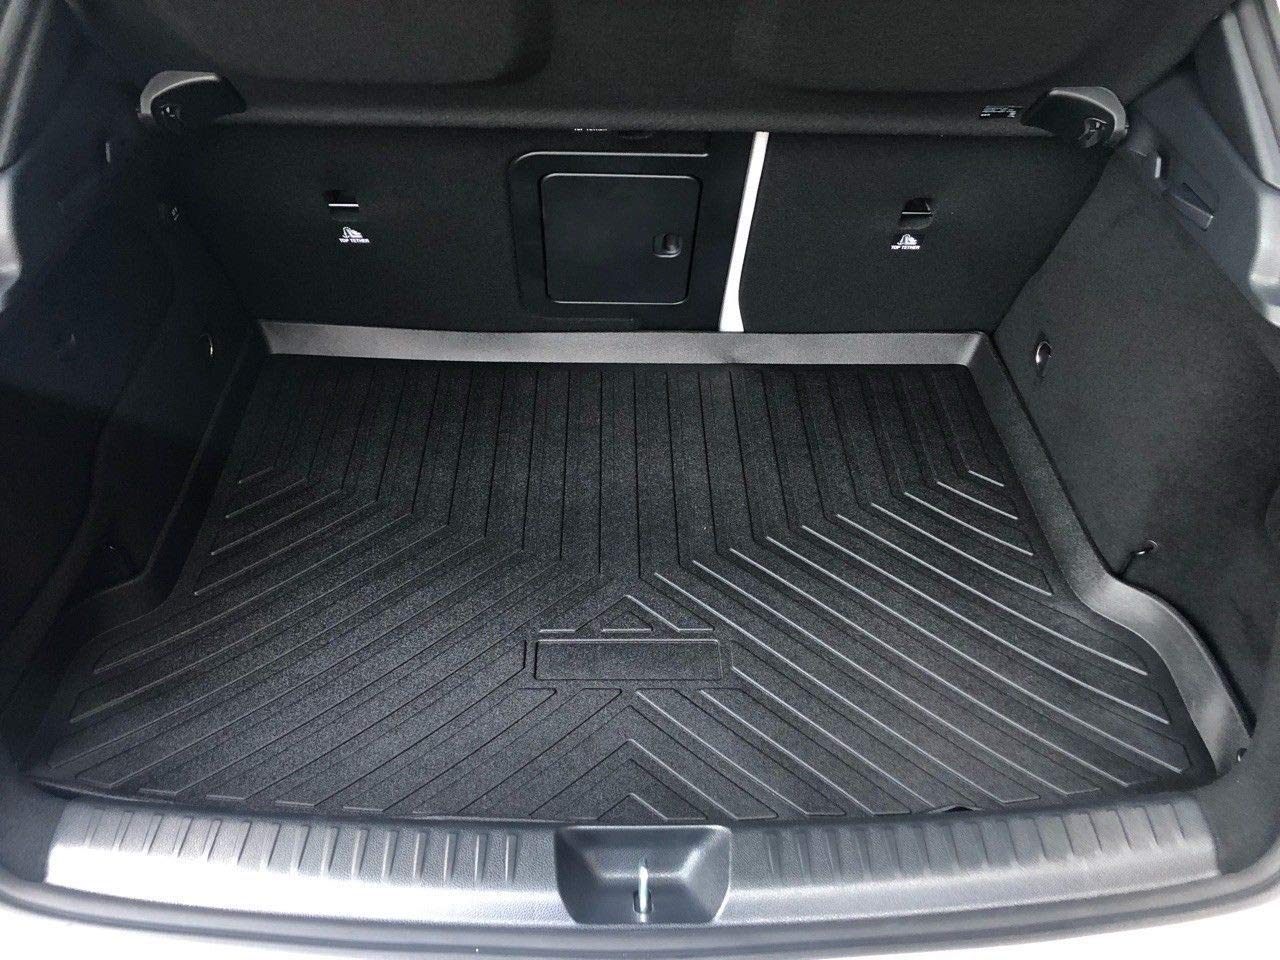 All-Weather Durable Trunk Floor Mat (Cargo Liner), Custom-Fit for Mercedes-Benz GLA-Class 2014 2015 2016 2017 2018 2019 2020. Water-Resistant, Non-...